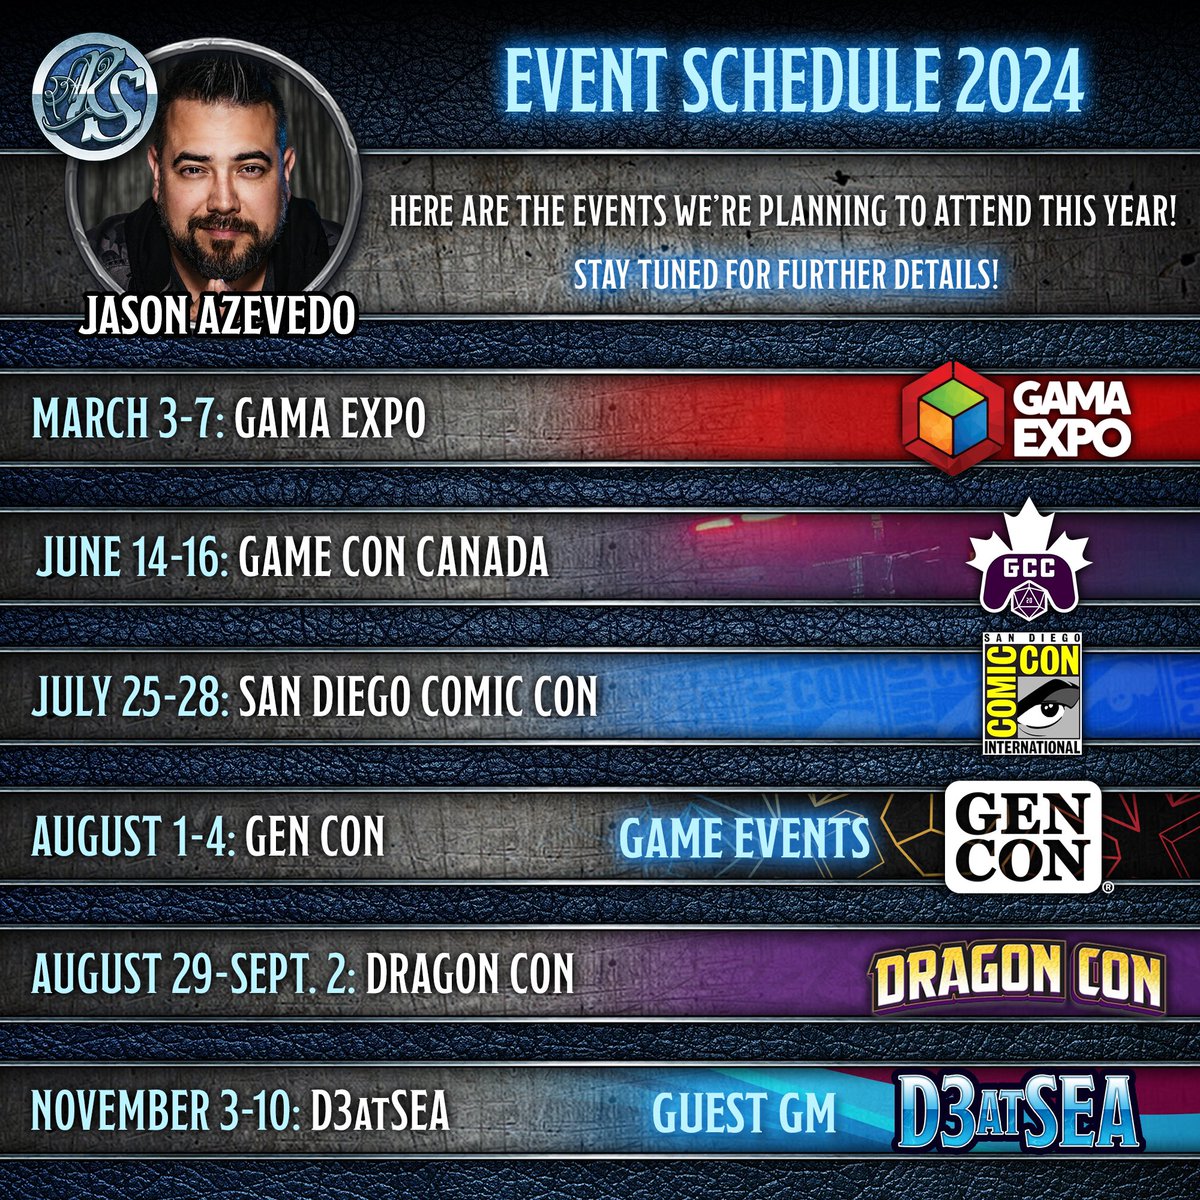 📣 2024 EVENT SCHEDULE 📣 Here are the events we’re planning to be at this convention season starting with GAMA EXPO this week! If you plan to be at any of these events, please don’t hesitate to say hi! #Dnd #dnd5e #dandd5e #dungeonsanddragons #dandd #ttrpg #tabletoprpg